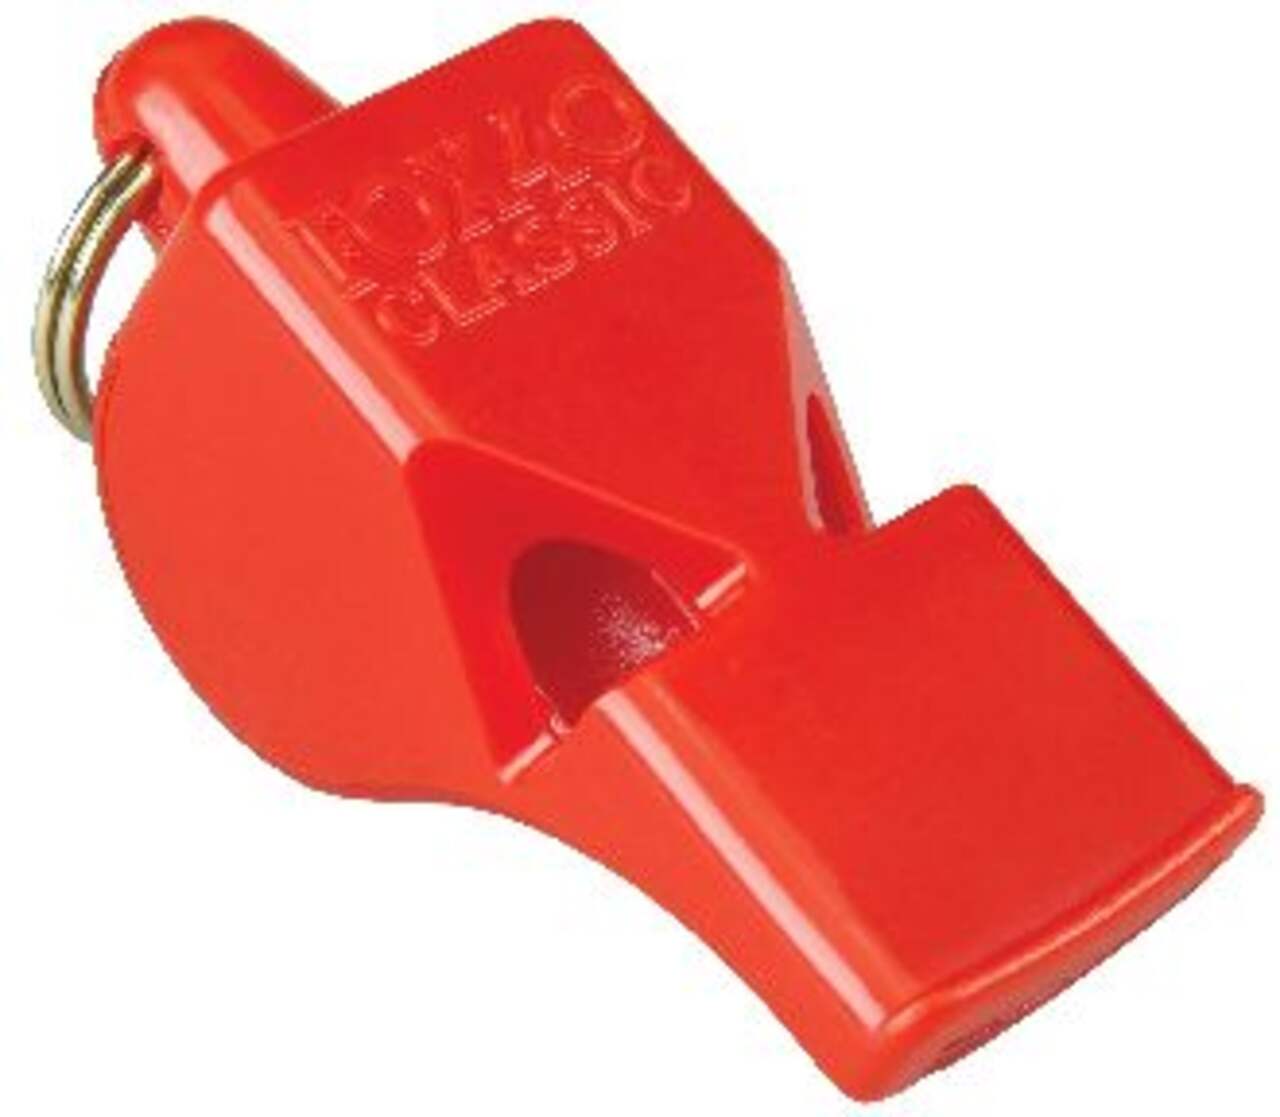 Fox 40 Classic Boat Whistle, Assorted